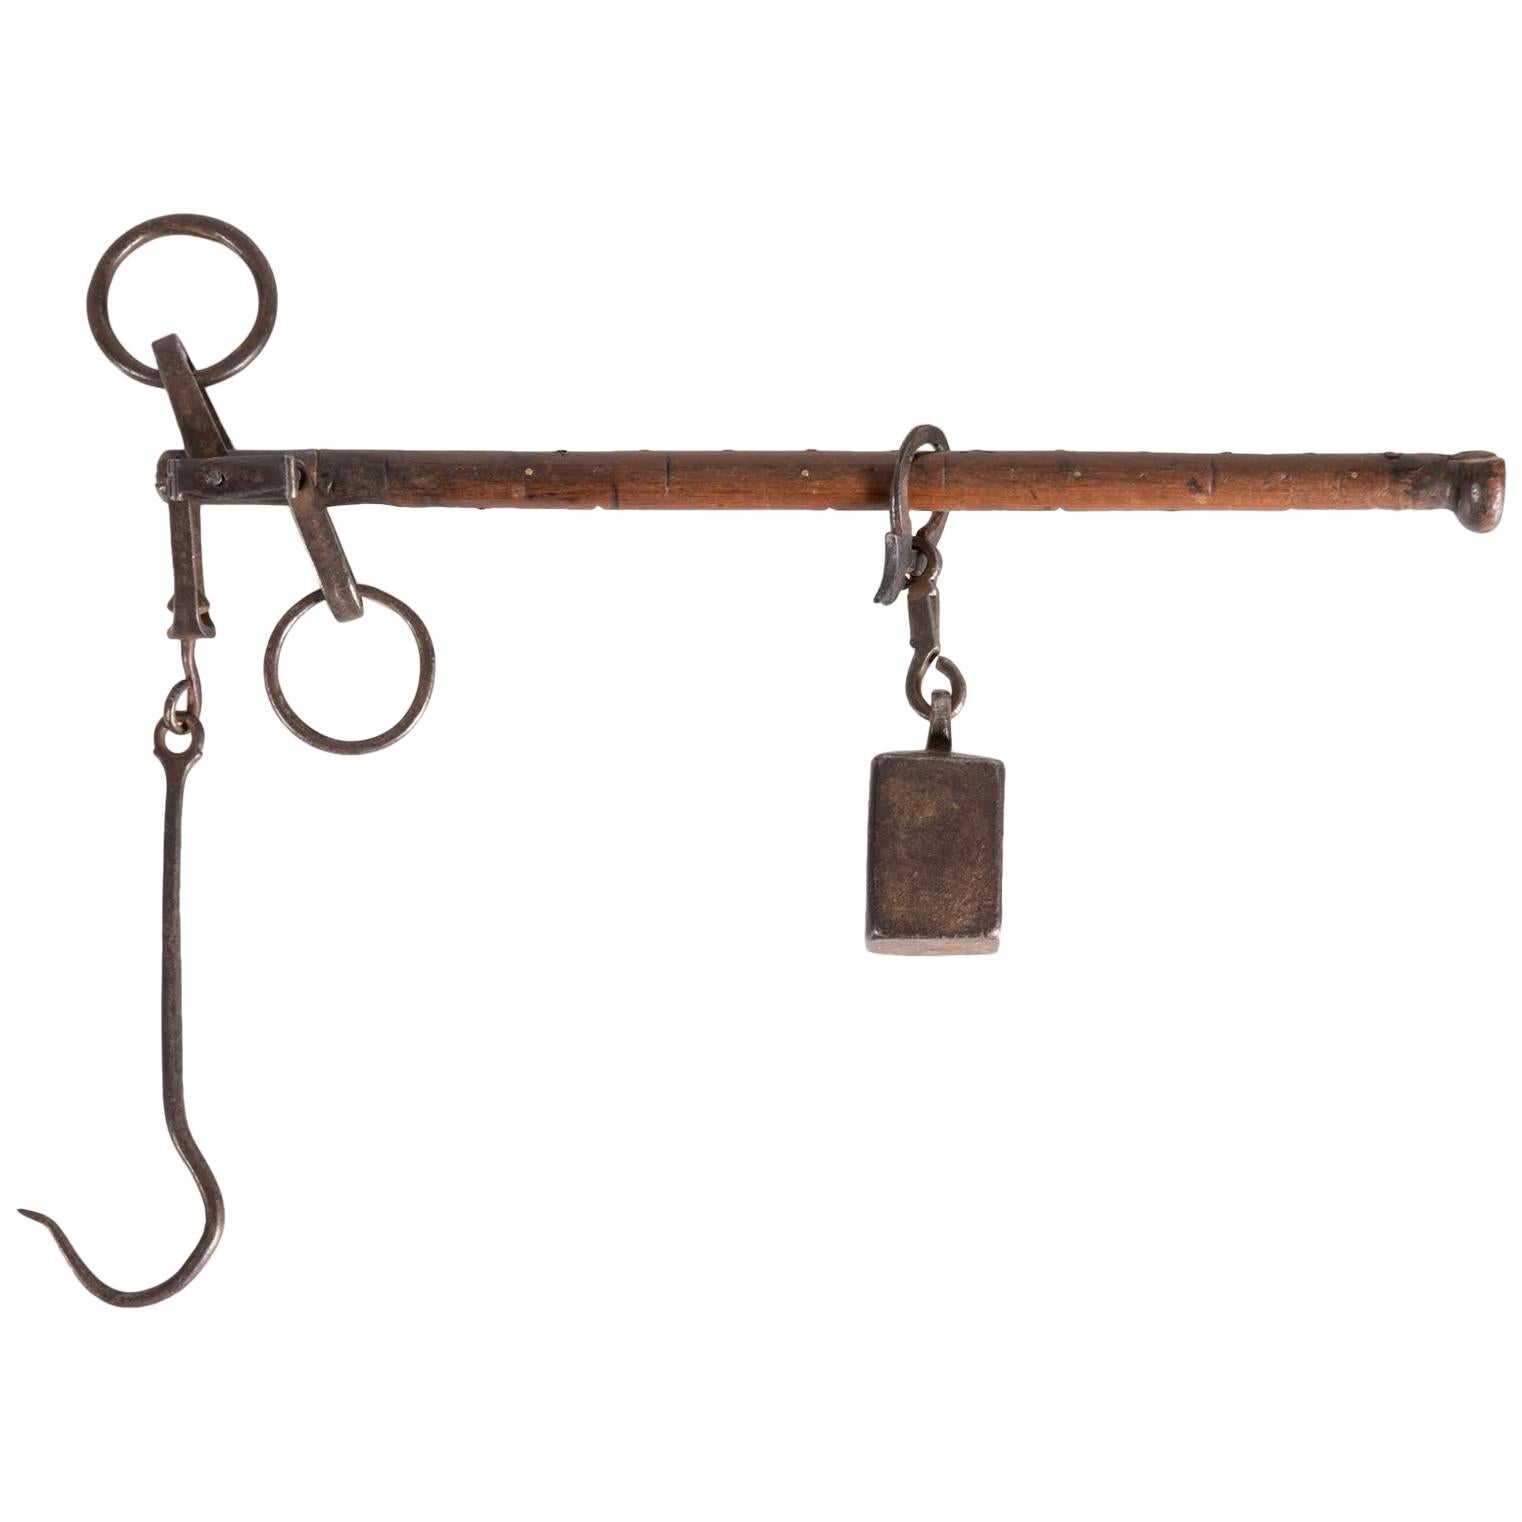 Swiss Iron and Wood Scale, Switzerland, Early 1800 For Sale